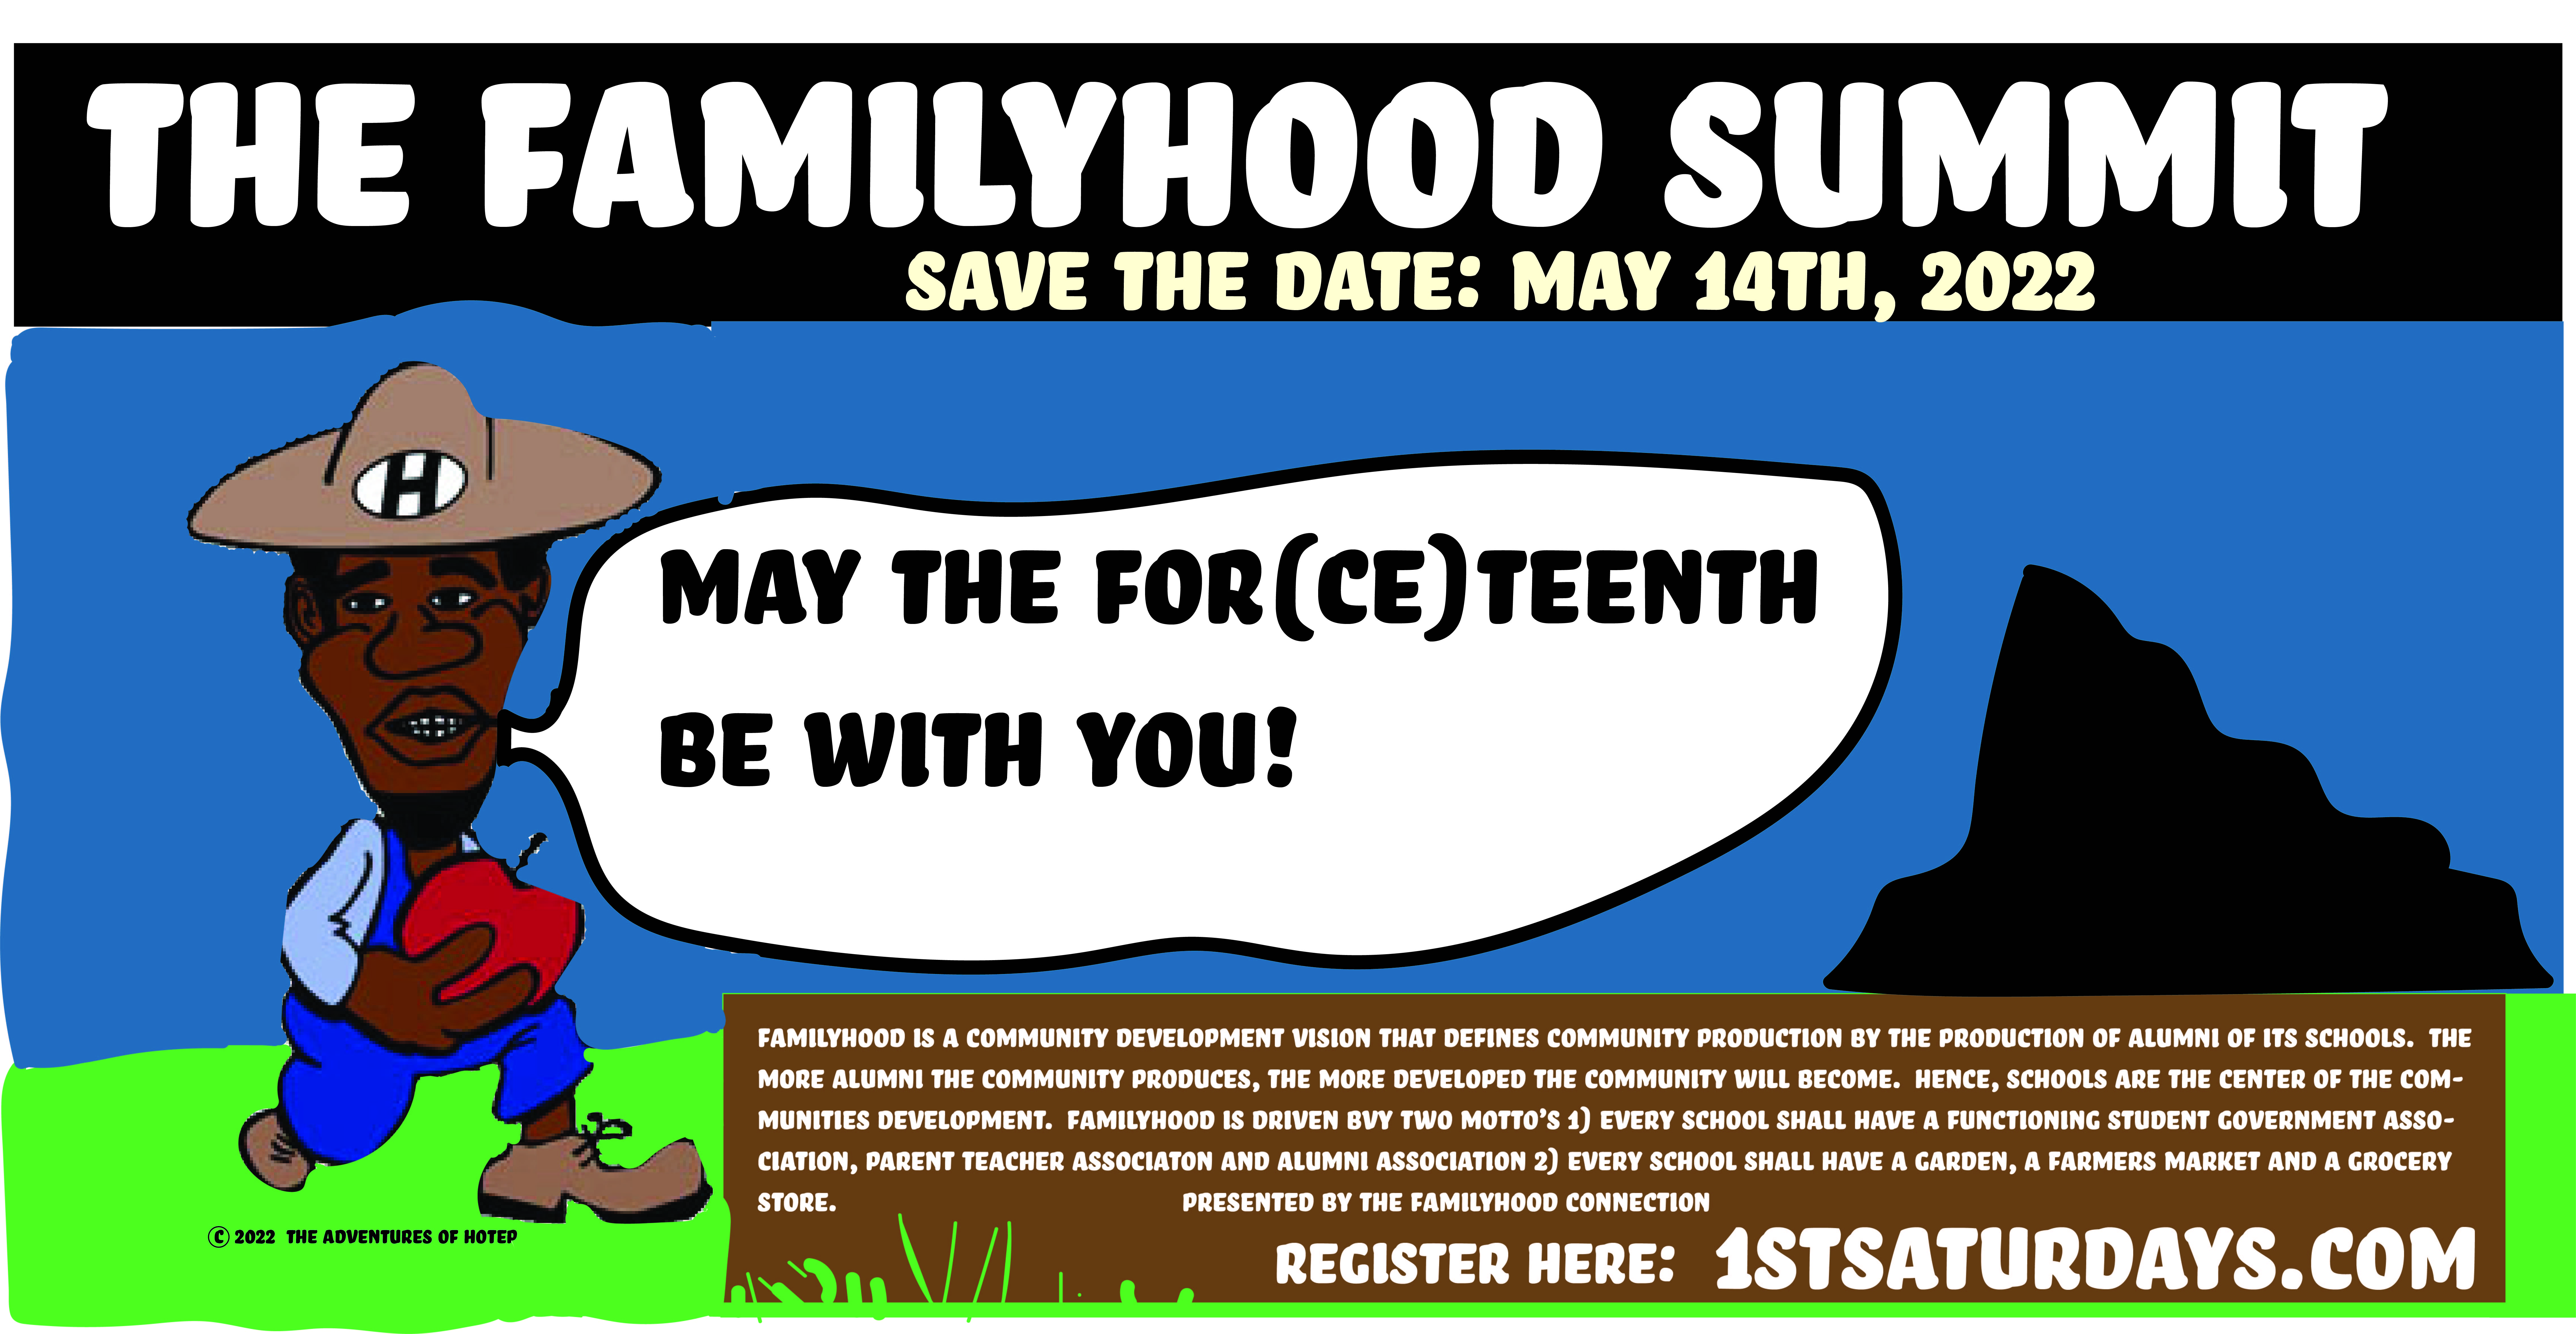 The Familyhood Summit – “May the For(ce)teenth Be With You!